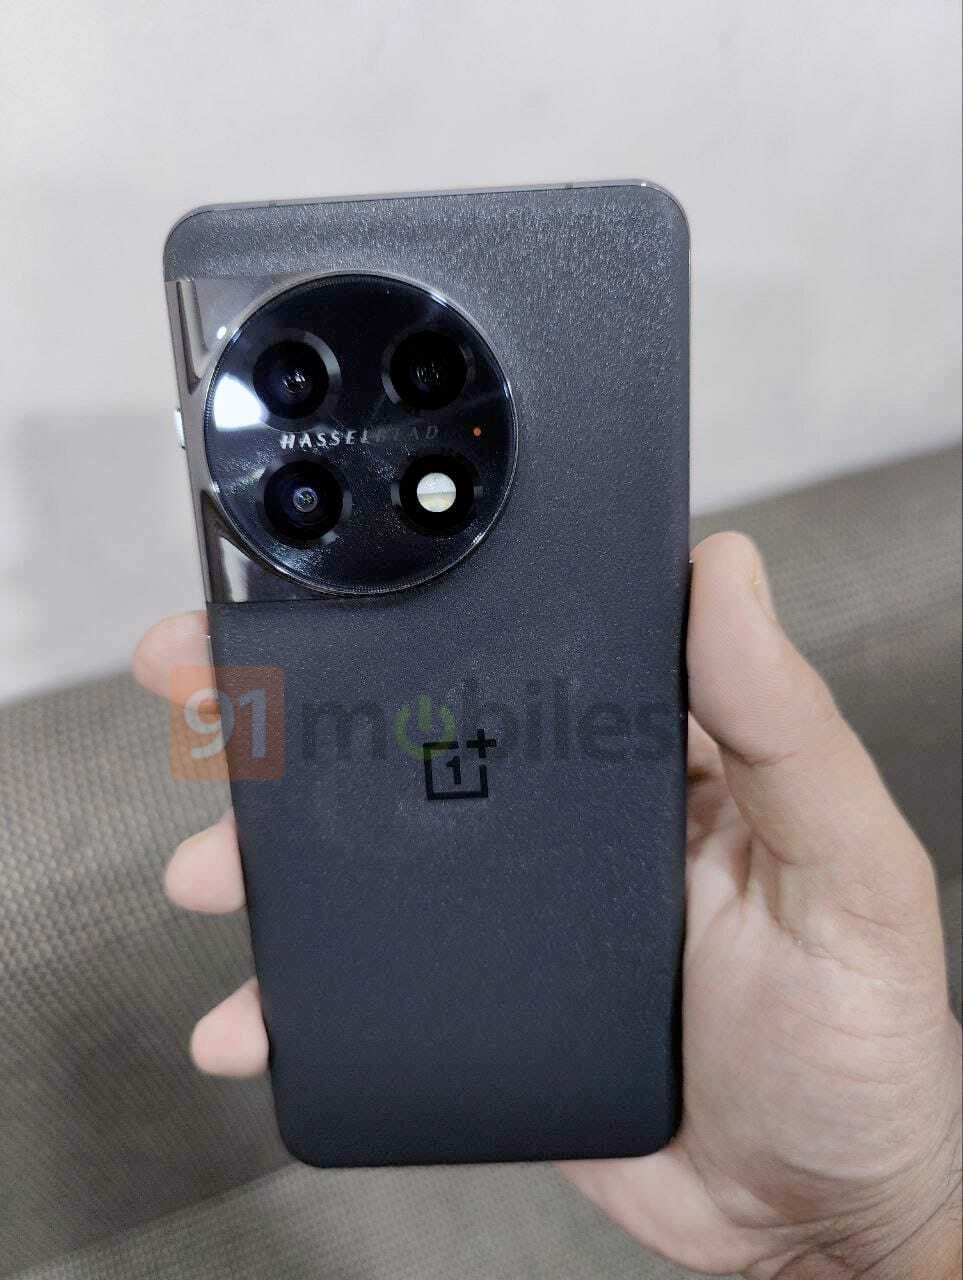 image 61 - OnePlus 11 images leaked before the official launch in China